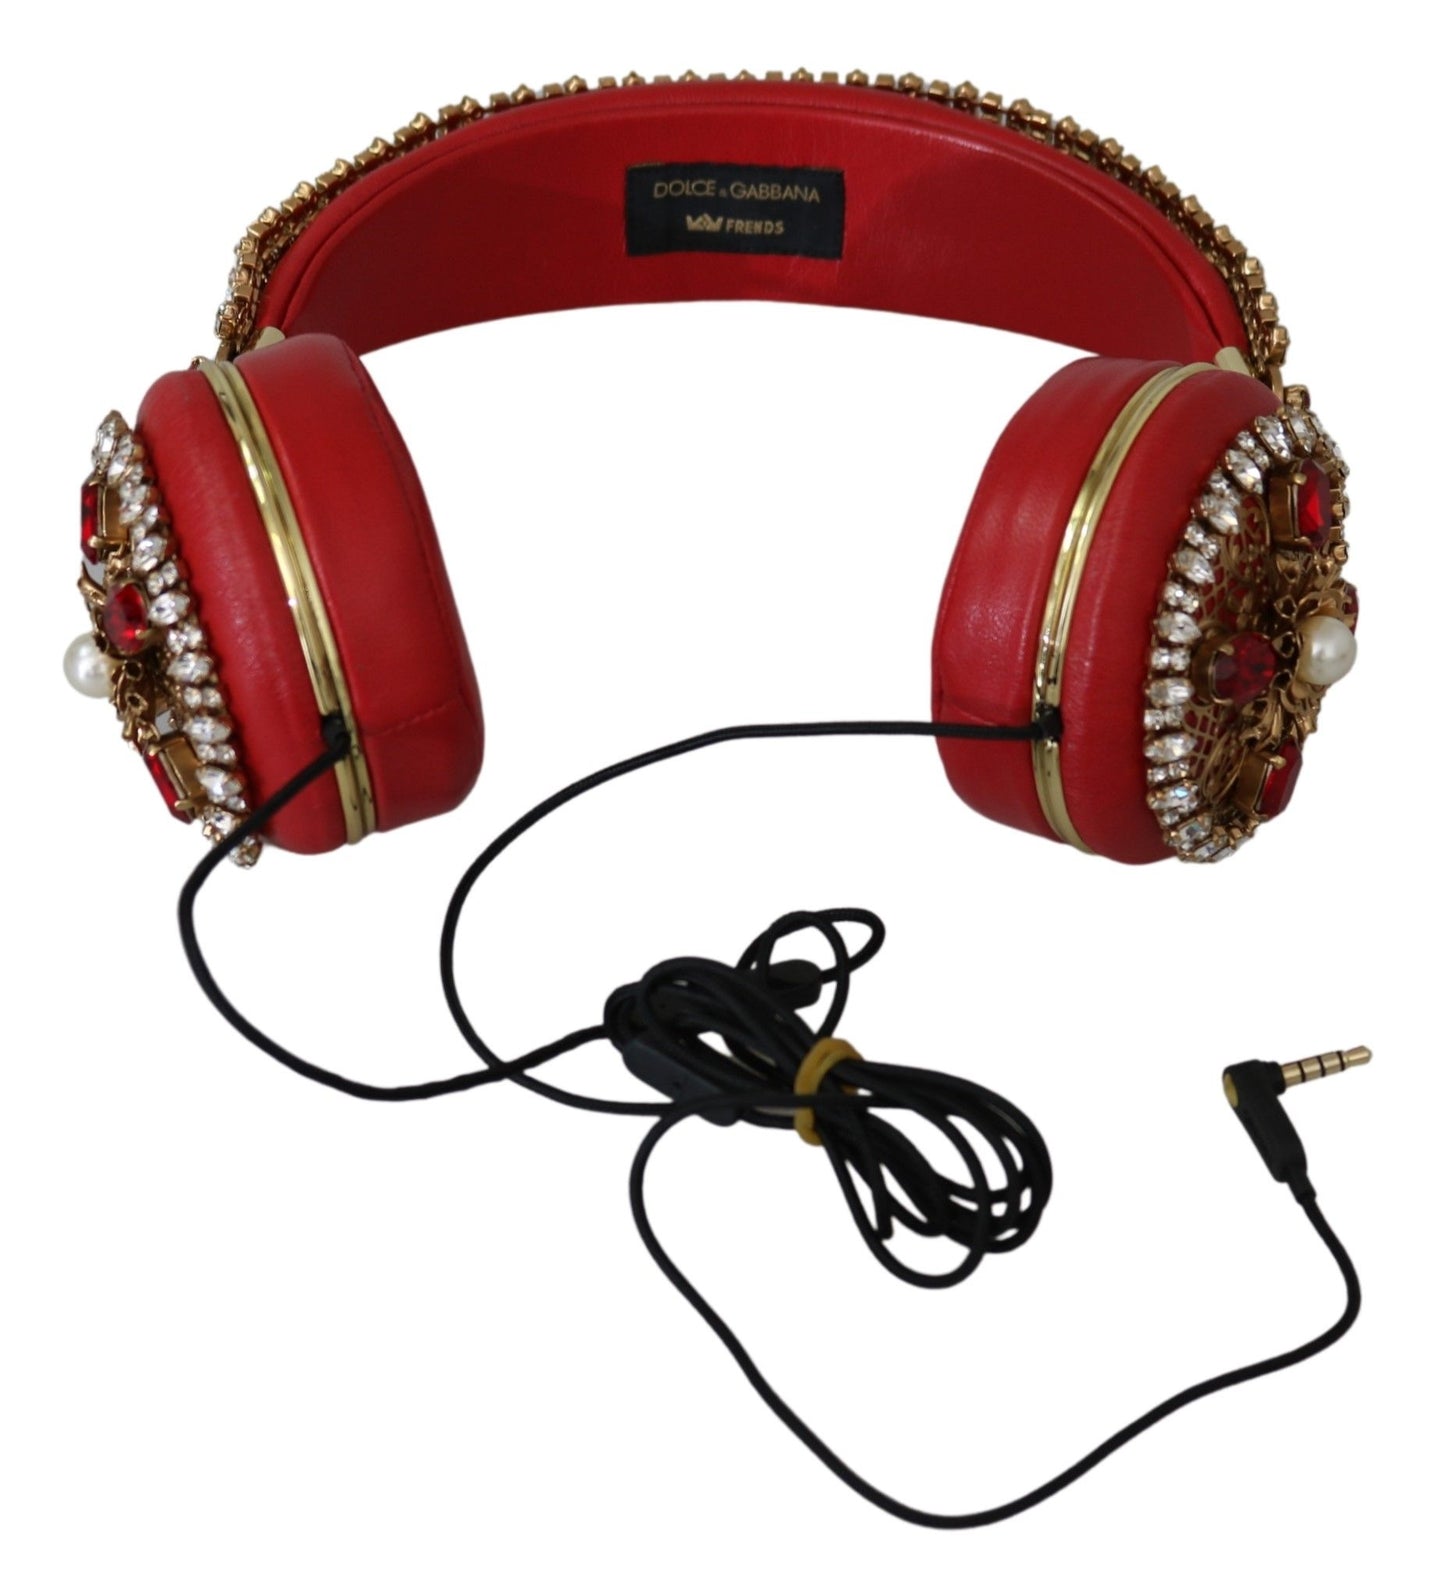 FRENDS Leather Red Floral Crystal Headset Headphones - Designed by Dolce & Gabbana Available to Buy at a Discounted Price on Moon Behind The Hill Online Designer Discount Store